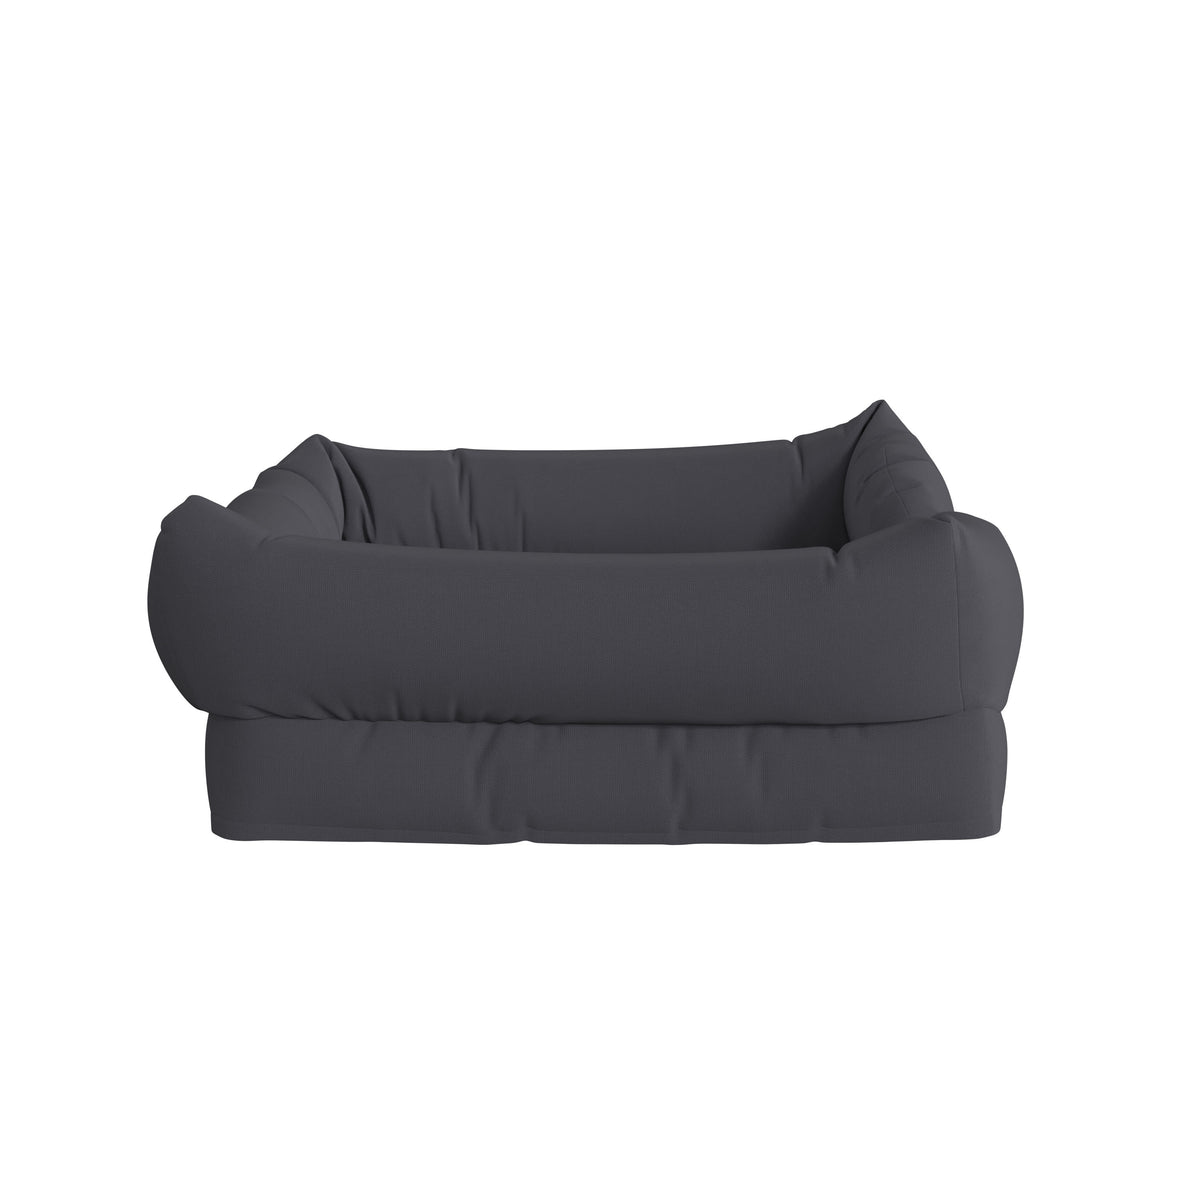 Small |#| Orthopedic 25inch x 20inch Memory Foam Dog Bed - Removable, Washable Cover-Gray